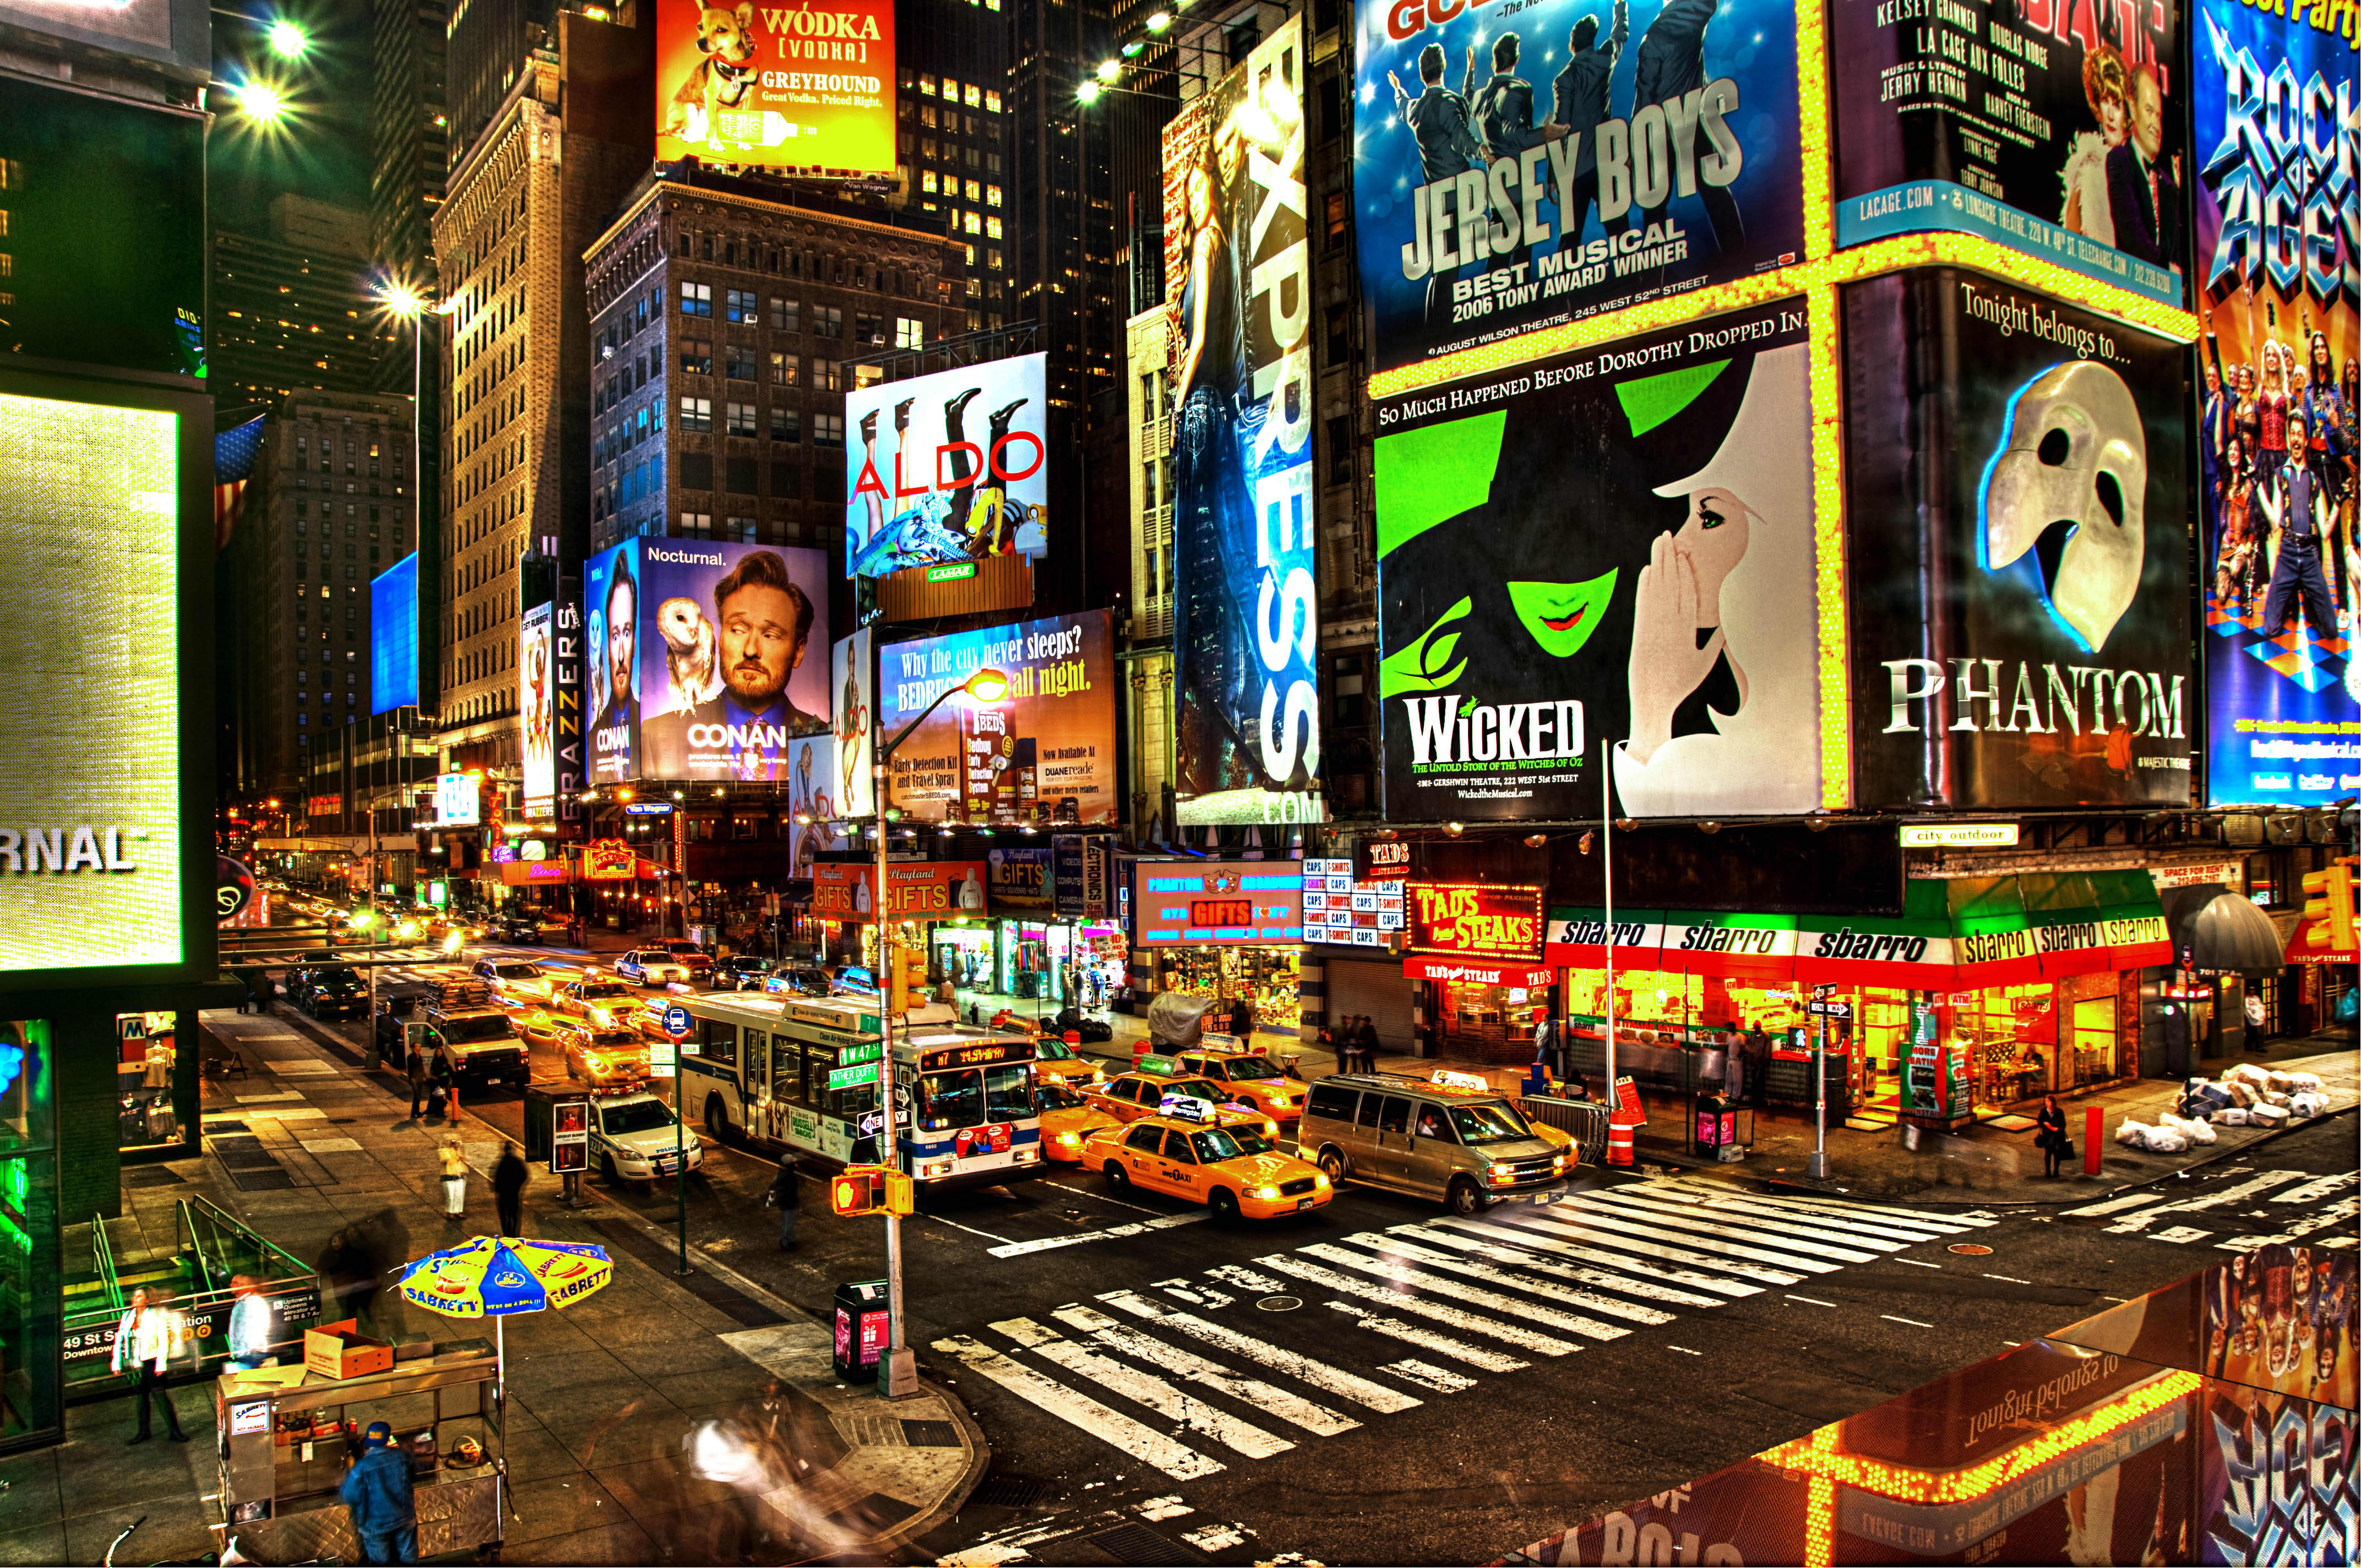 Broadway on demand: Streaming platform takes theater to screen